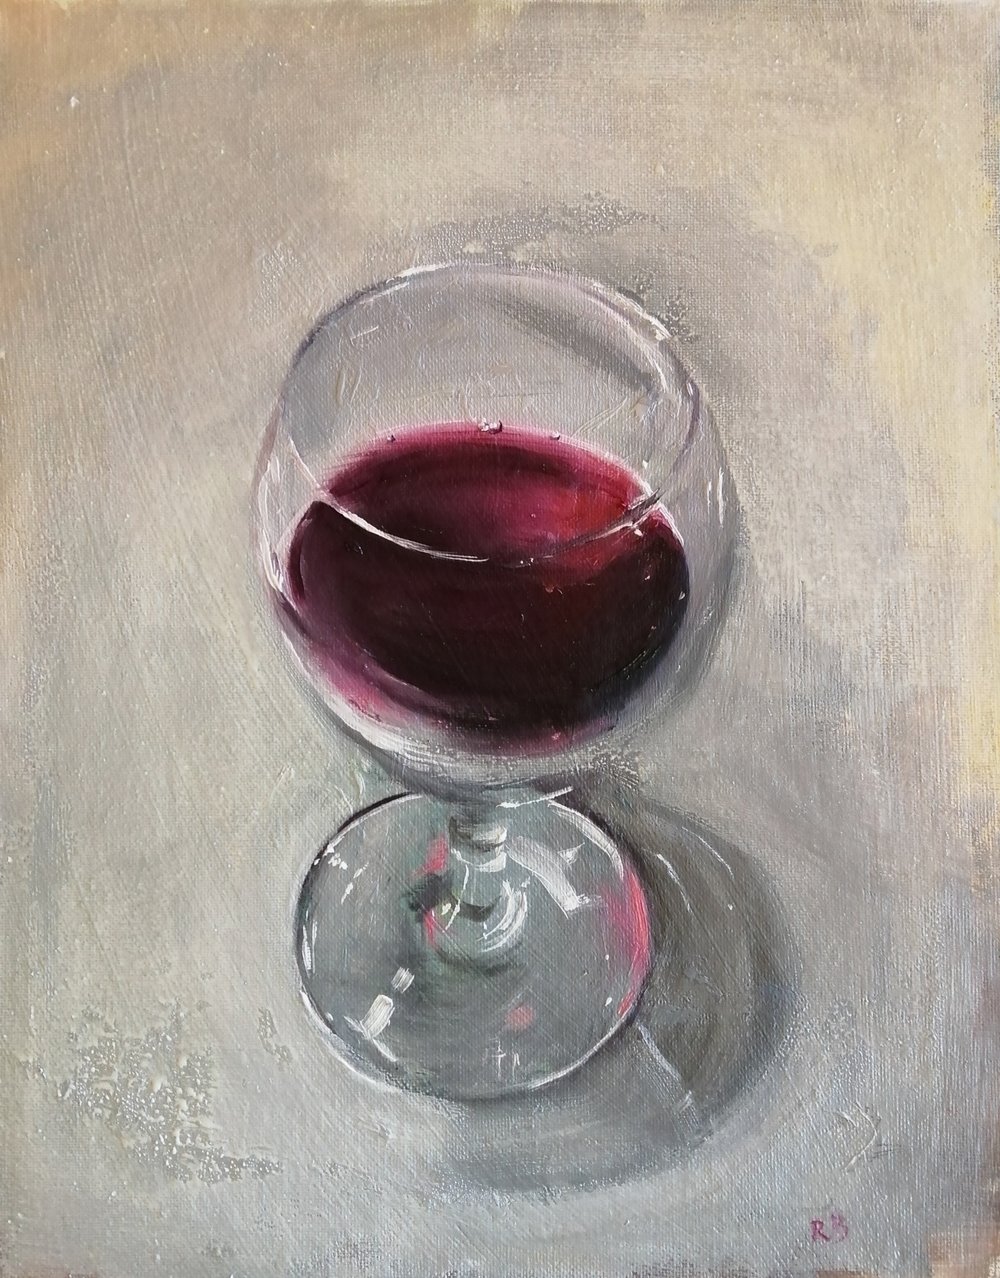  Red  Oil on board  28x36cm  not currently available  A still life study of a glass of red wine. I enjoyed reproducing the subtle shades, from the deep red in the centre of the glass, to the shallow shades around the edges and in the reflections on t